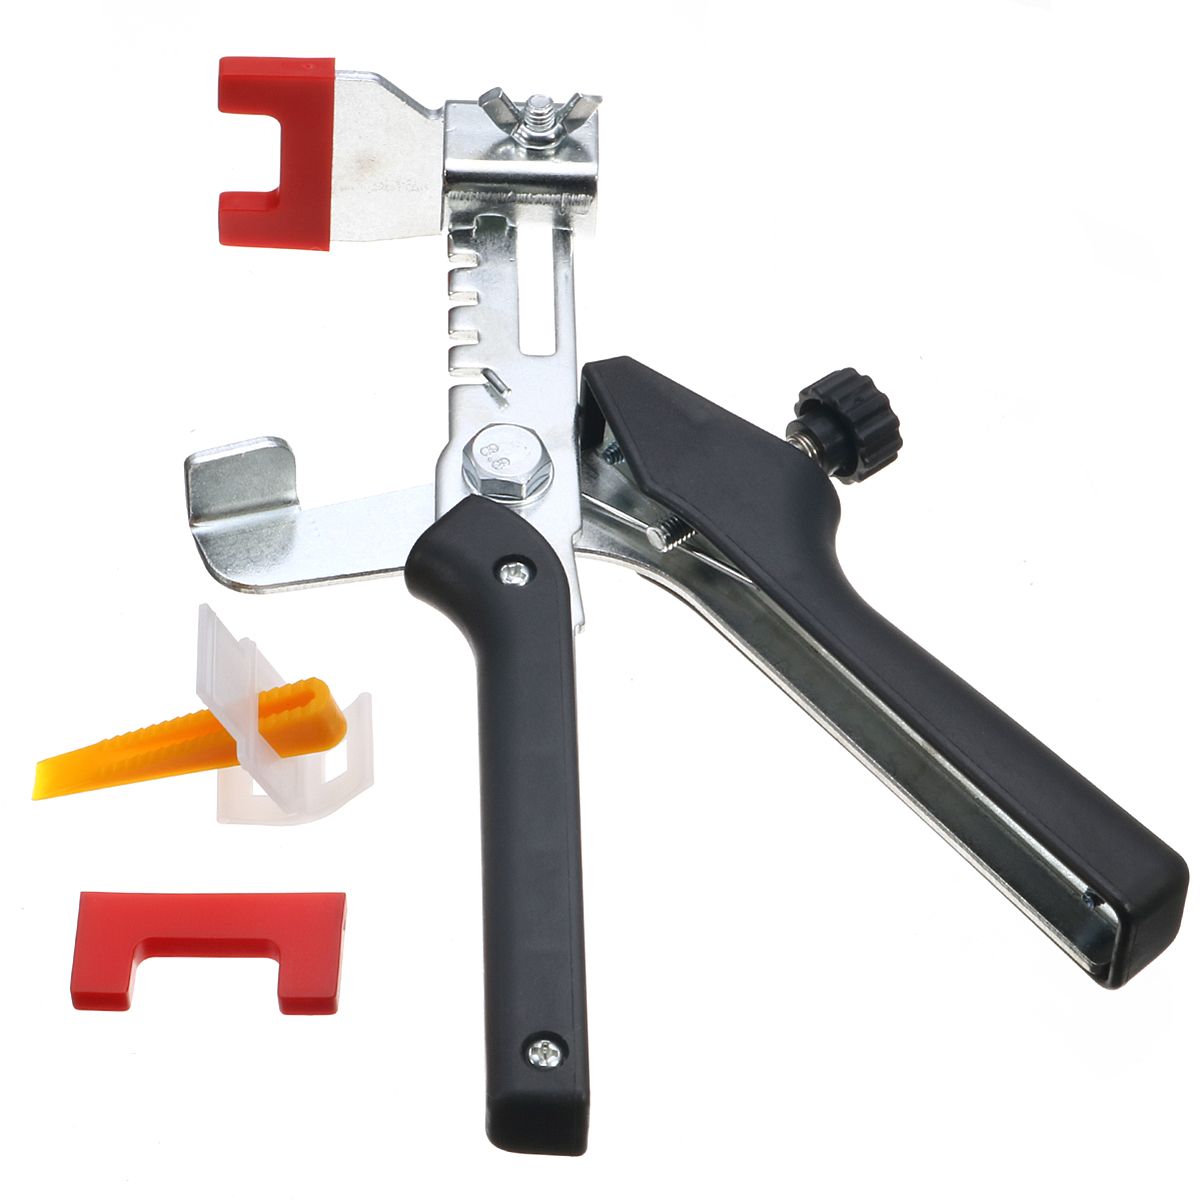 100pcs-Tile-Leveling-System-Wedges-and-Clips-Plier-Spacer-Flooring-Plastic-Tiling-Tools-1148268